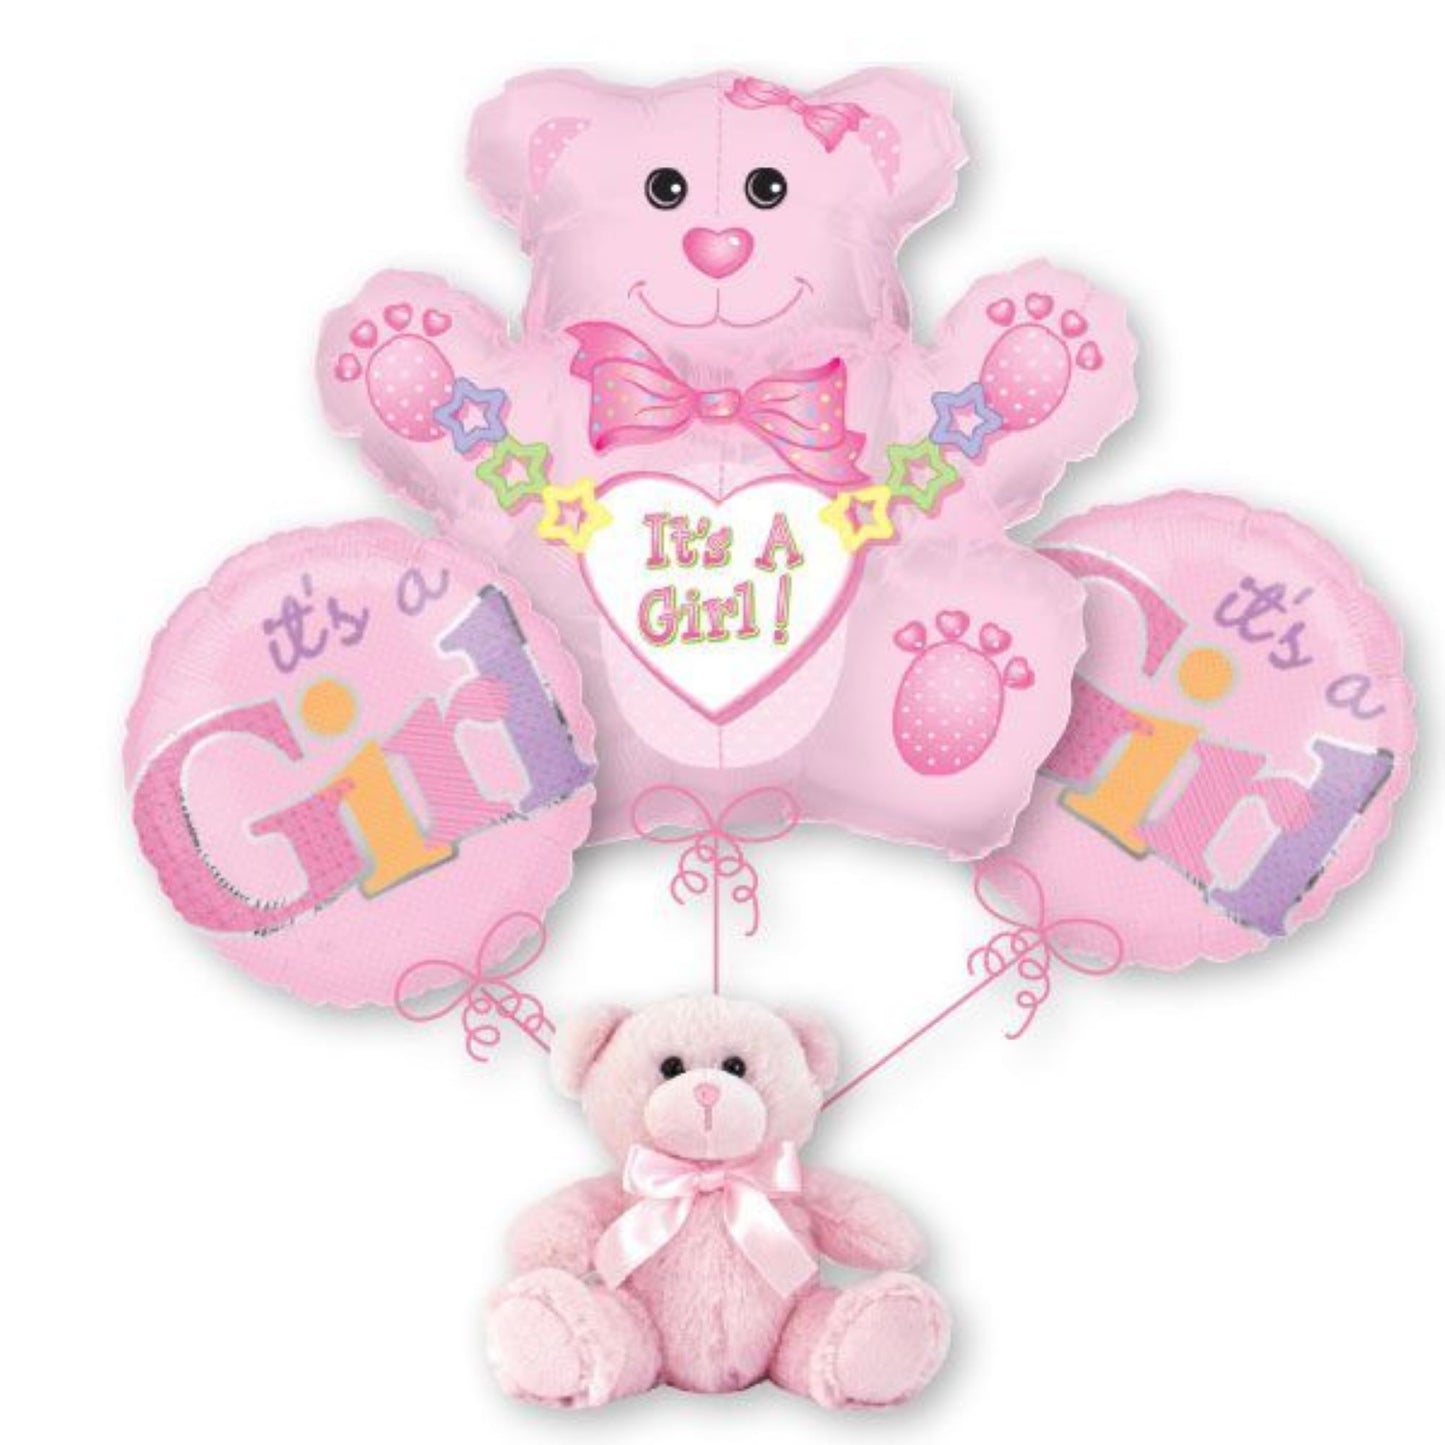 Balloon Bouquet with Teddy bear - pink